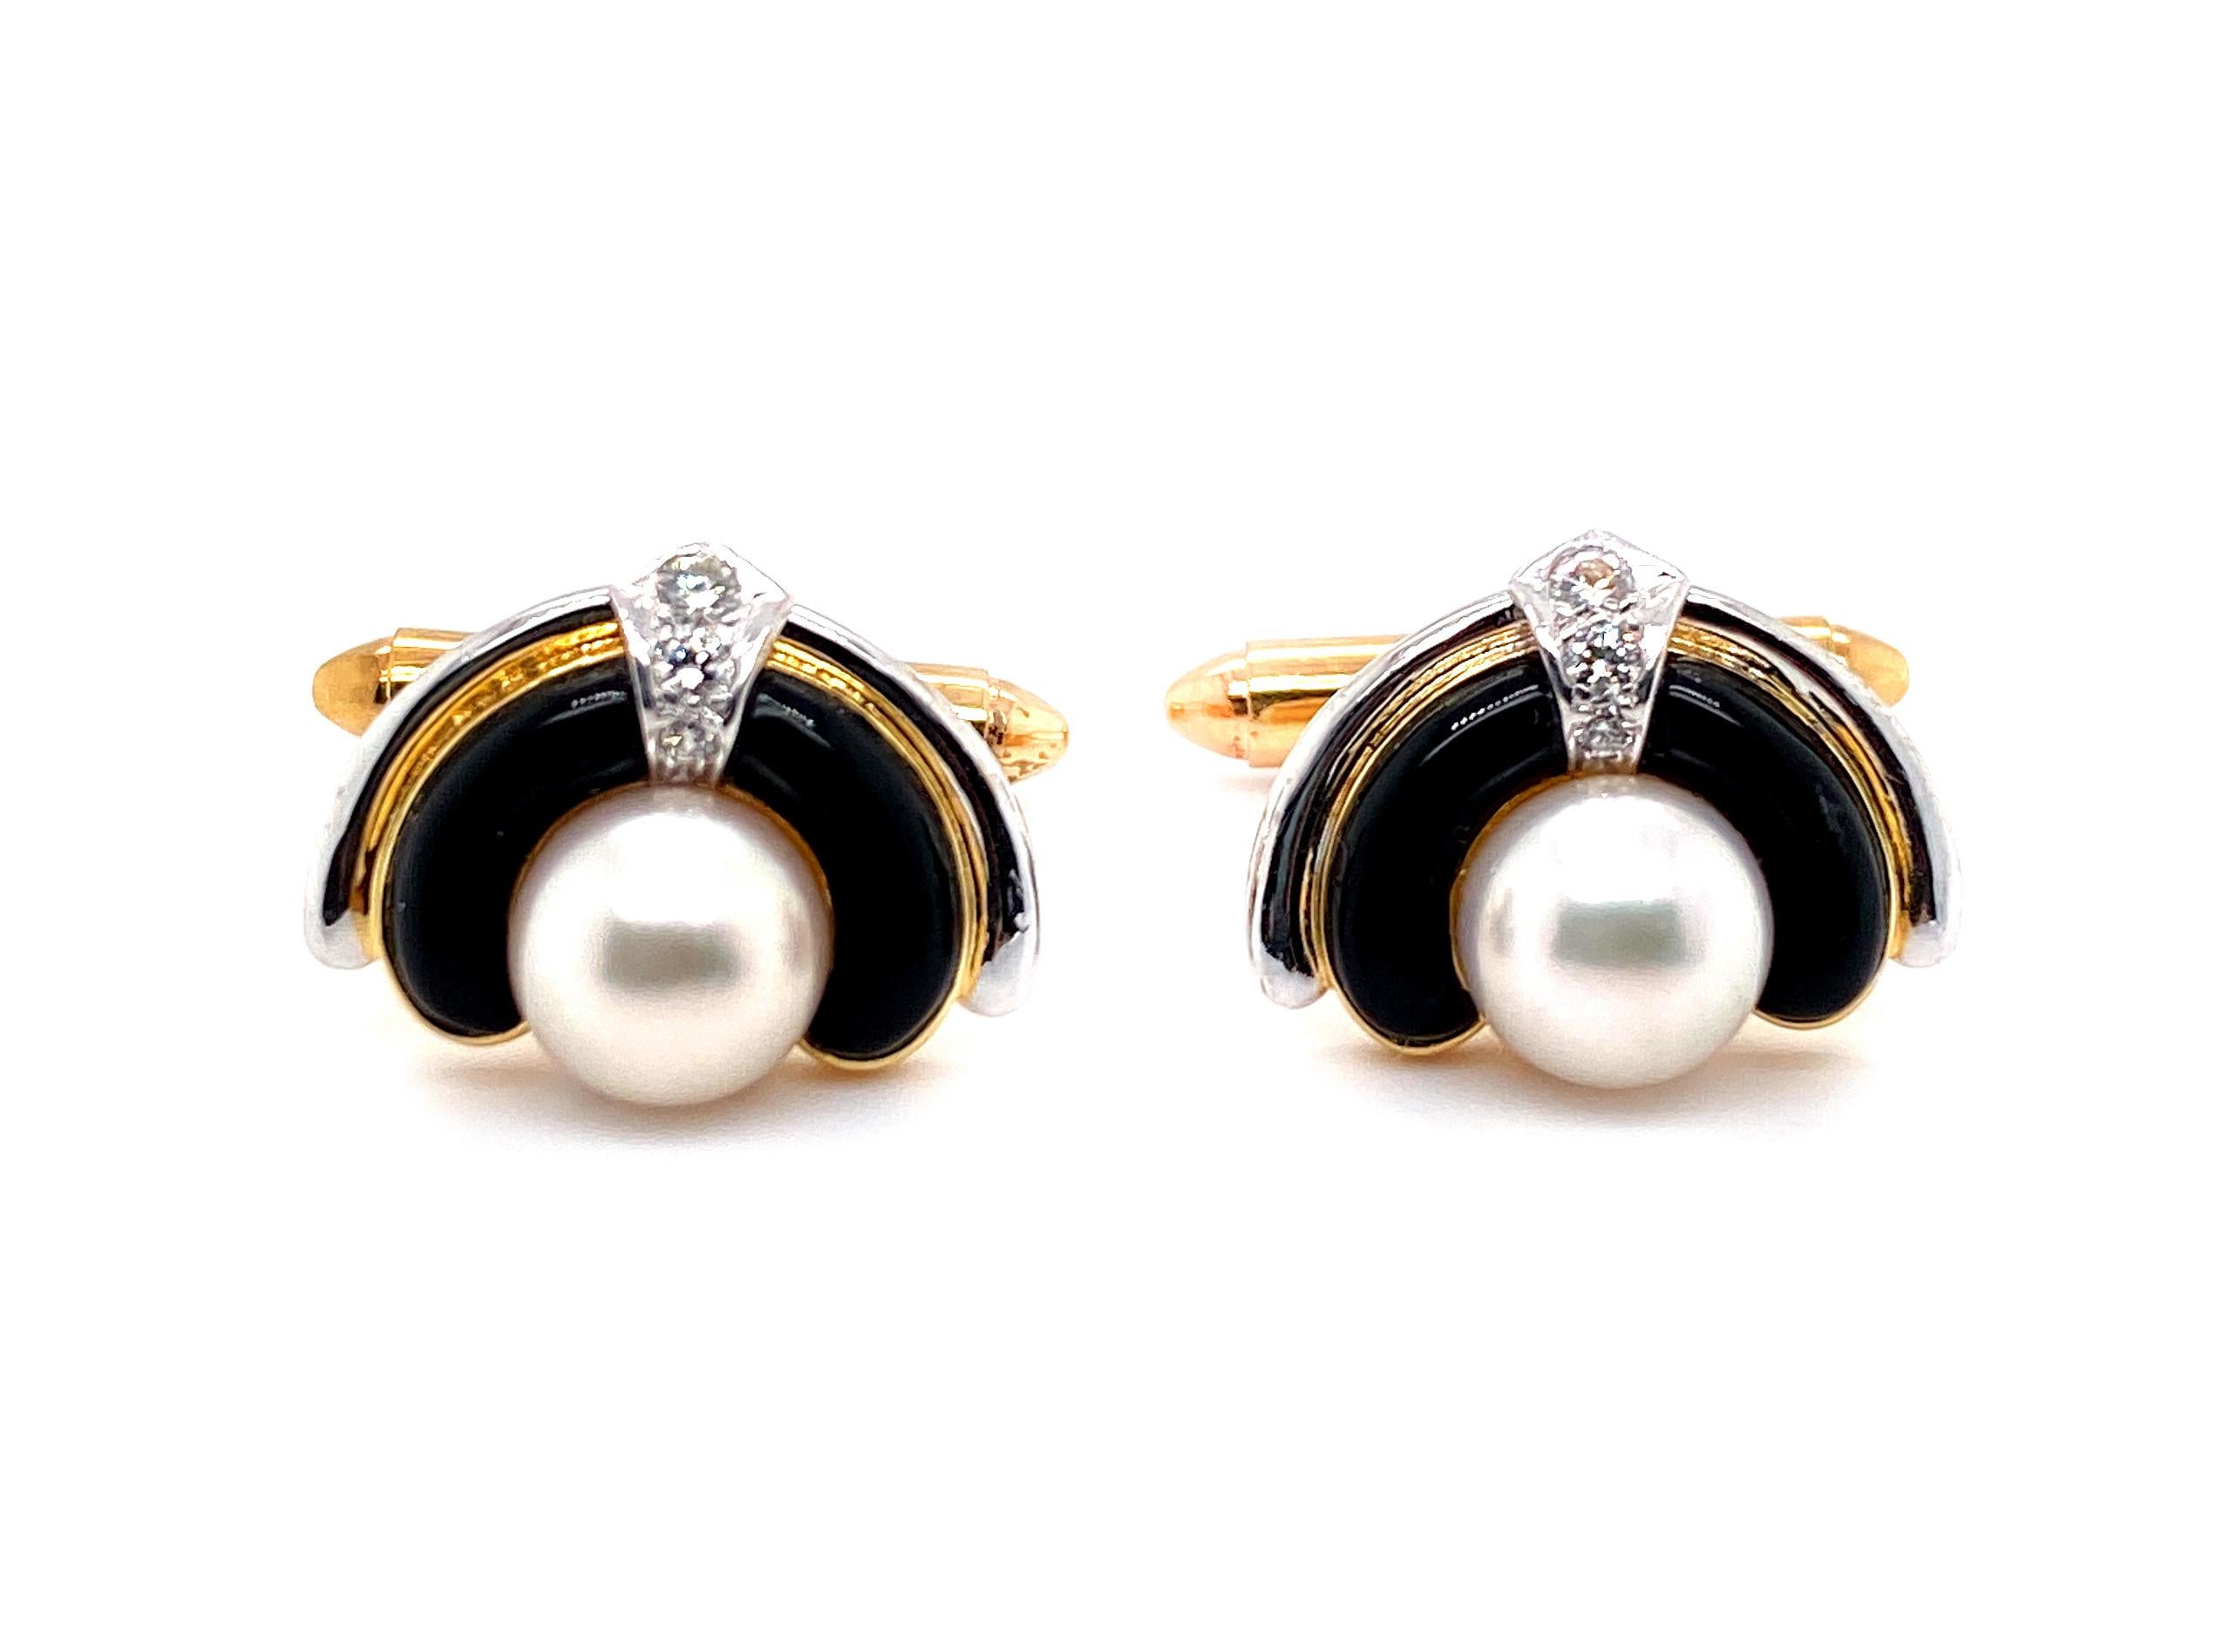 A classic 18 karat white and yellow gold piece with a timeless appeal. Each cufflink in this pair features a beautiful freshwater pearl of 7.88mm size and 3 round collection grade diamonds, bordered by the majestic onyx stone. This piece was